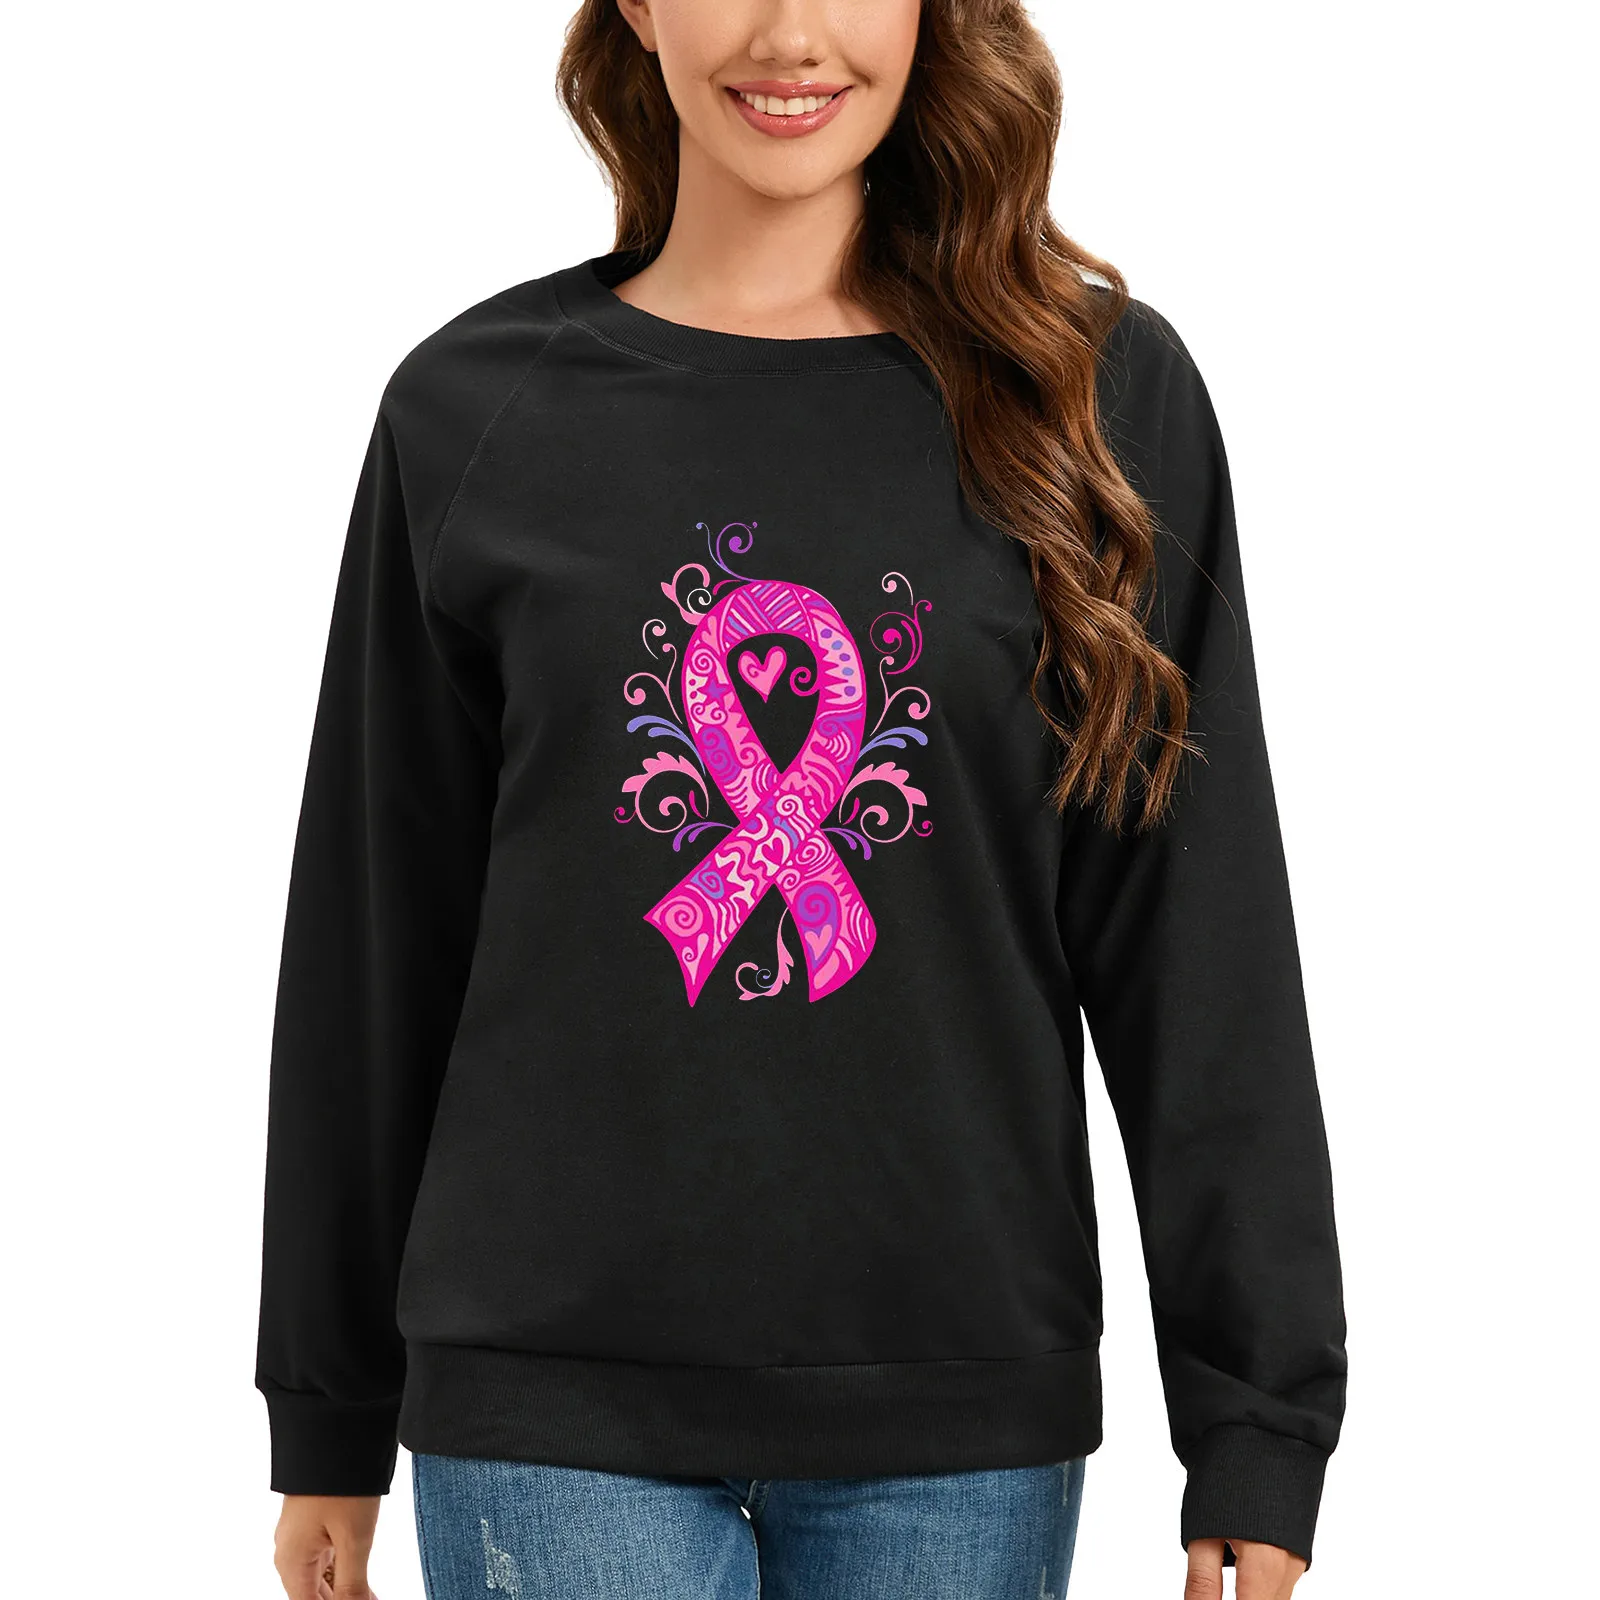 

Breast Cancer Awareness Print Hoodless Sweetshirts For Women Round Neck Long Sleeve Sweatshirt Tops Oversize Casual Casual Tunic